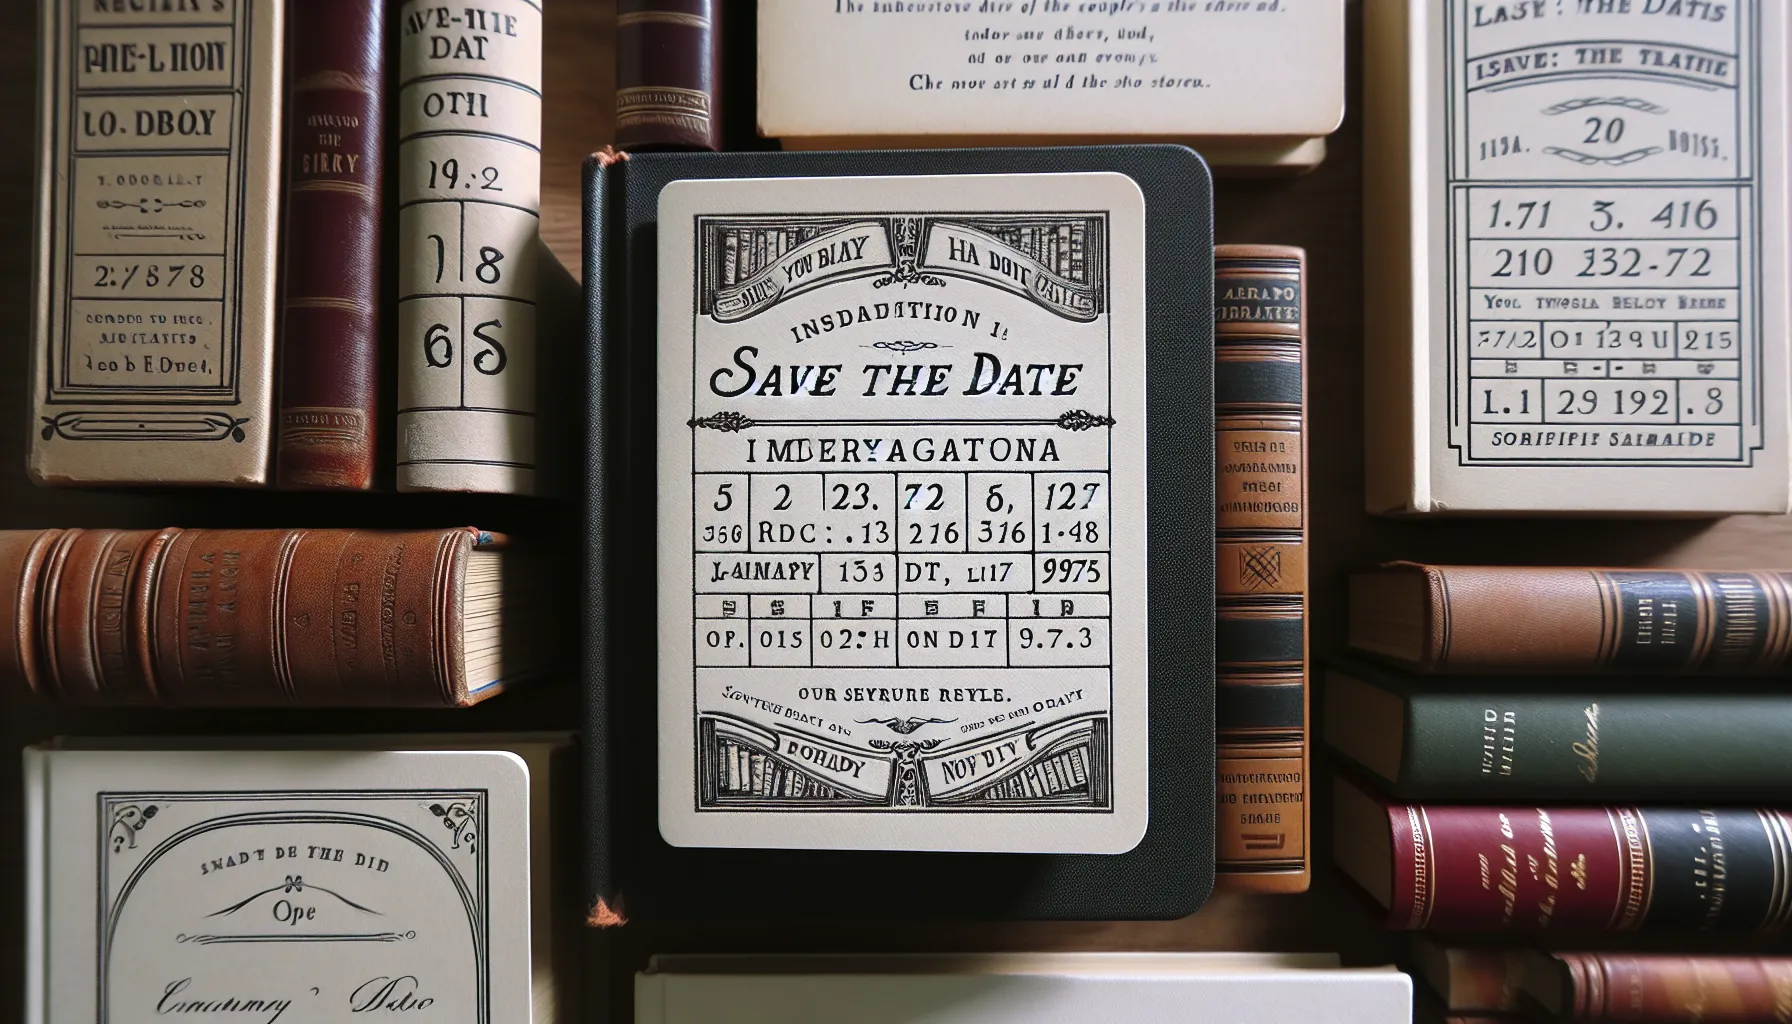 This library card, a token of timeless romance, invites guests to 'check out' the next chapter in a love story that rivals the classics surrounding it.